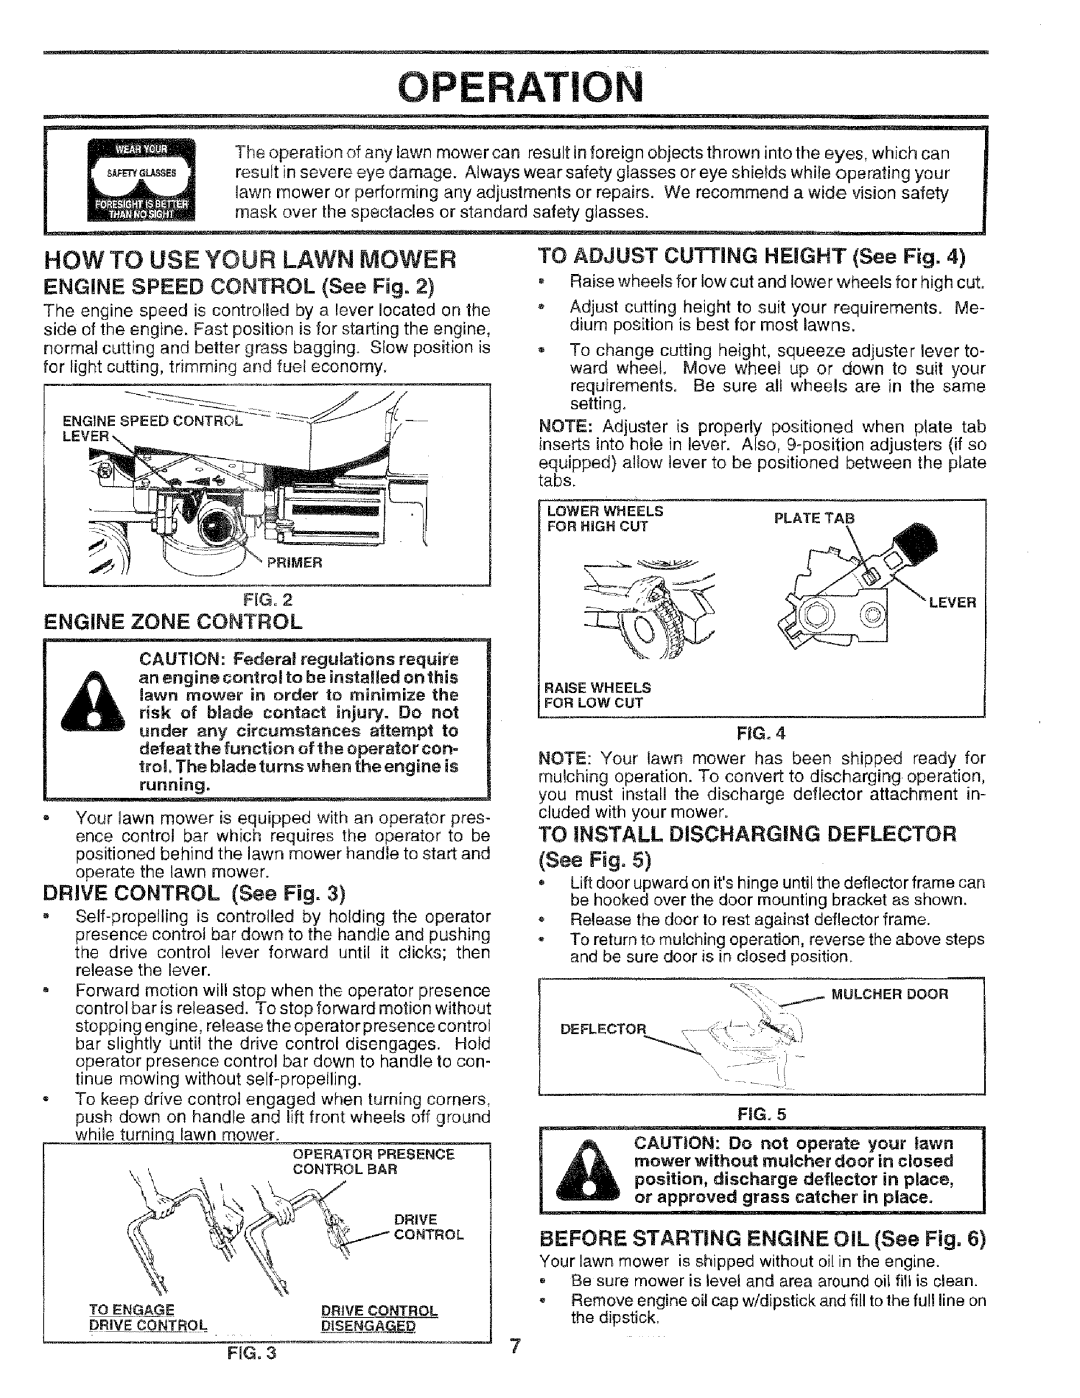 Sears 917.377201 Operation, How To Use Your Lawn Mower, TO ADJUST CUTTING HEIGHT See Fig, ENGINE SPEED CONTROL See Fig 